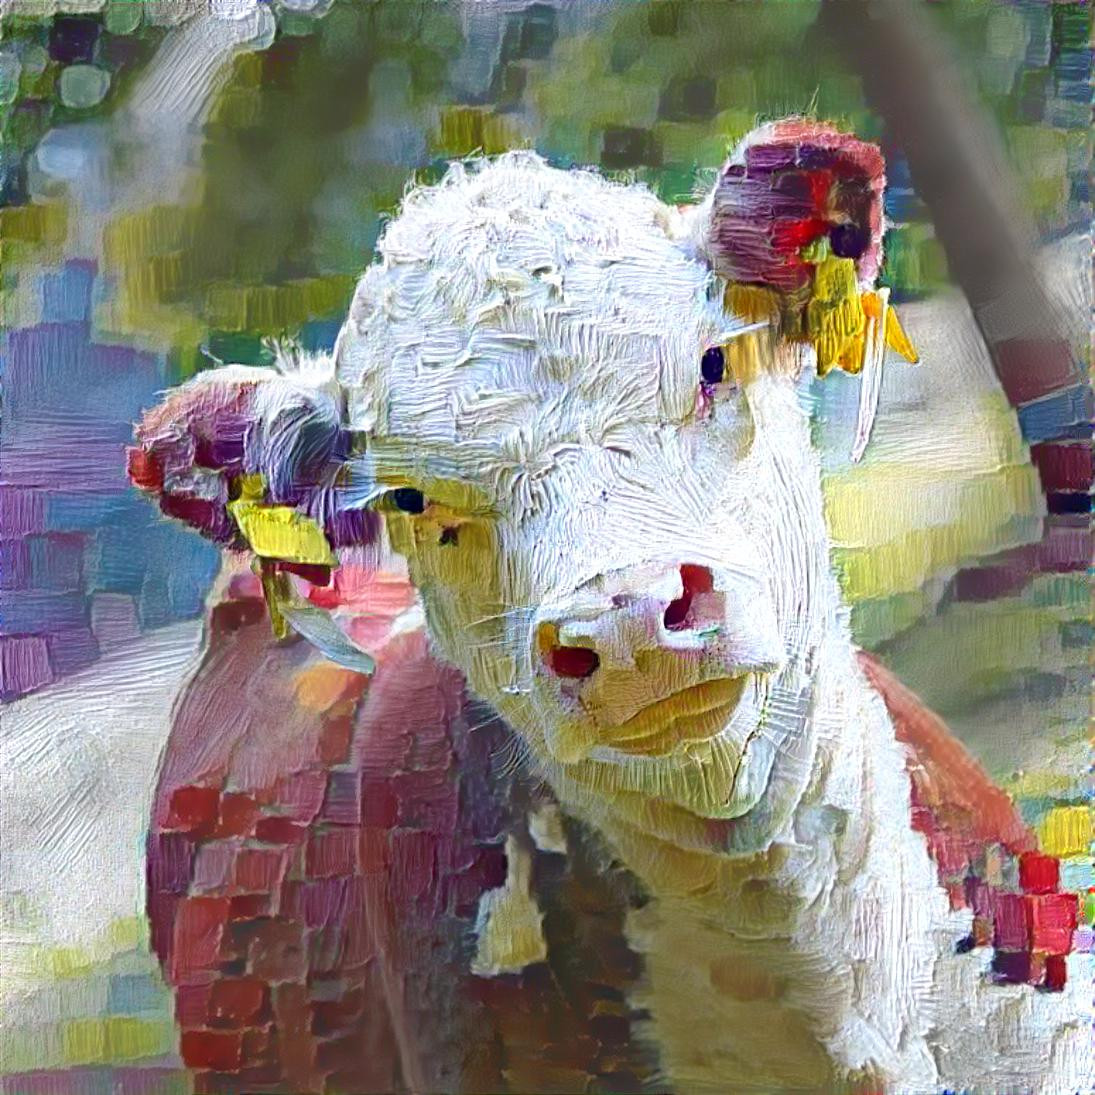 Cow(tje)